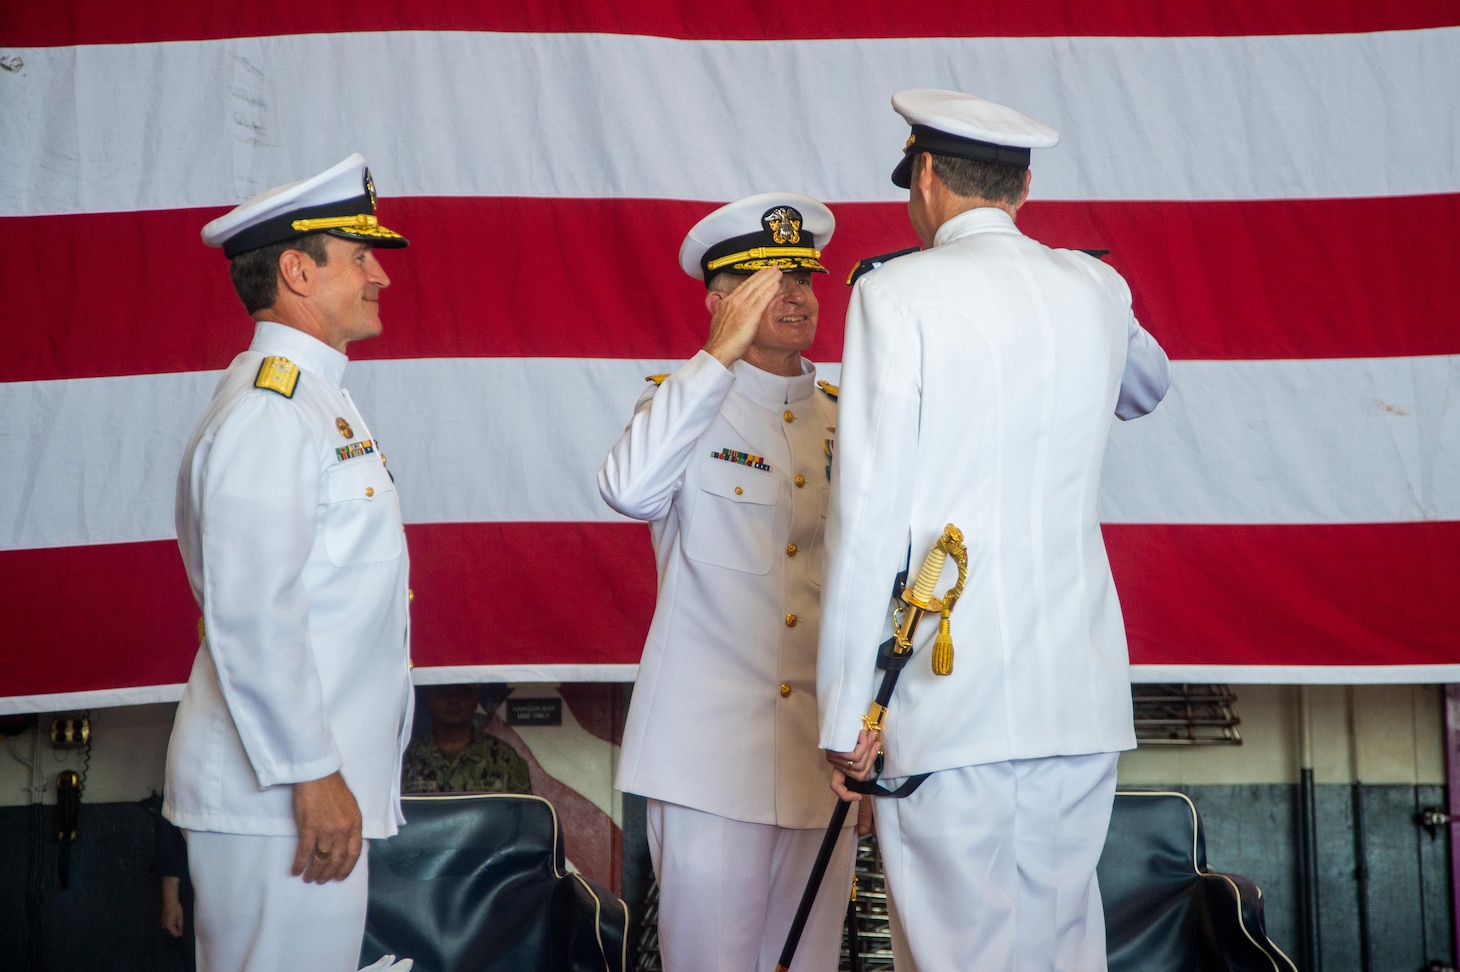 Rear Adm. Curt Renshaw, commander, Carrier Strike Group (CSG) 8, right, receives a salute from Vice Adm. Daniel Dwyer, commander, U.S. Second Fleet, middle, after relieving Rear Adm. Ryan Scholl, left, during a change of command ceremony for CSG-8 in the hangar bay of the Nimitz-class aircraft carrier USS Harry S. Truman (CVN 75).